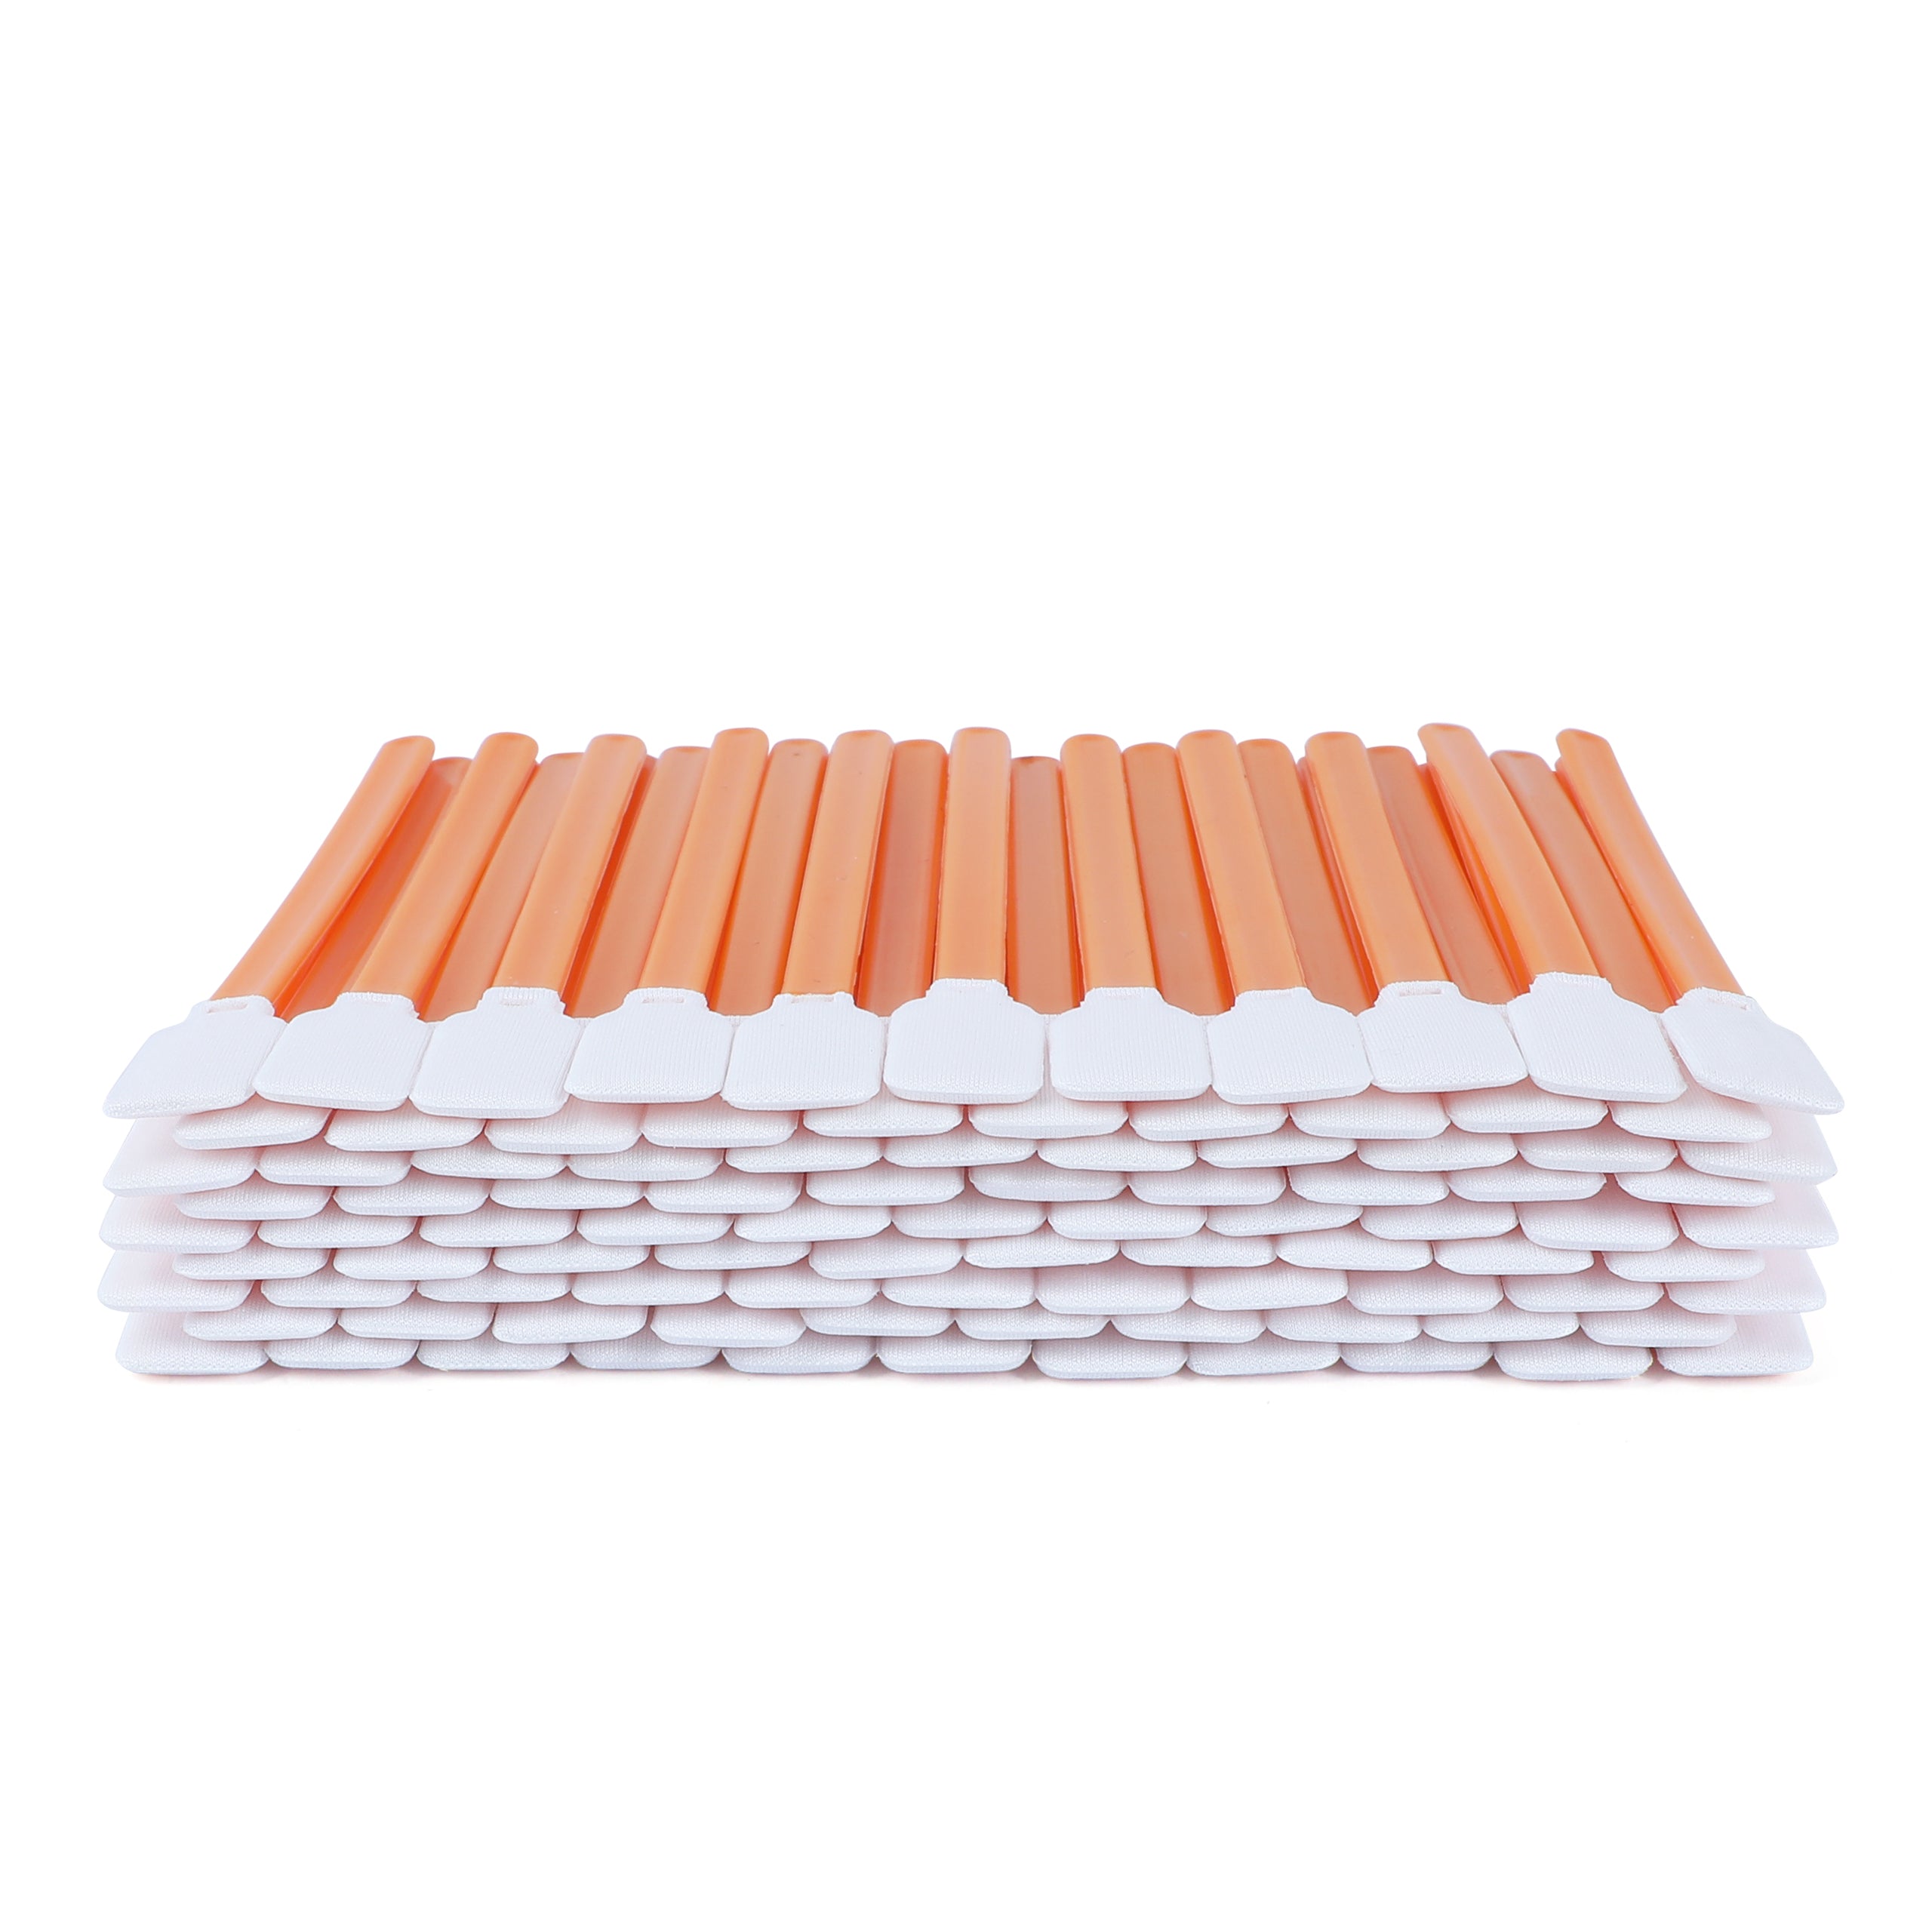 4.92" Polyester Swabs (1,000 pcs, Large Flat Square Polyester Head 13.5 mm/0.53")(No. A5125A)